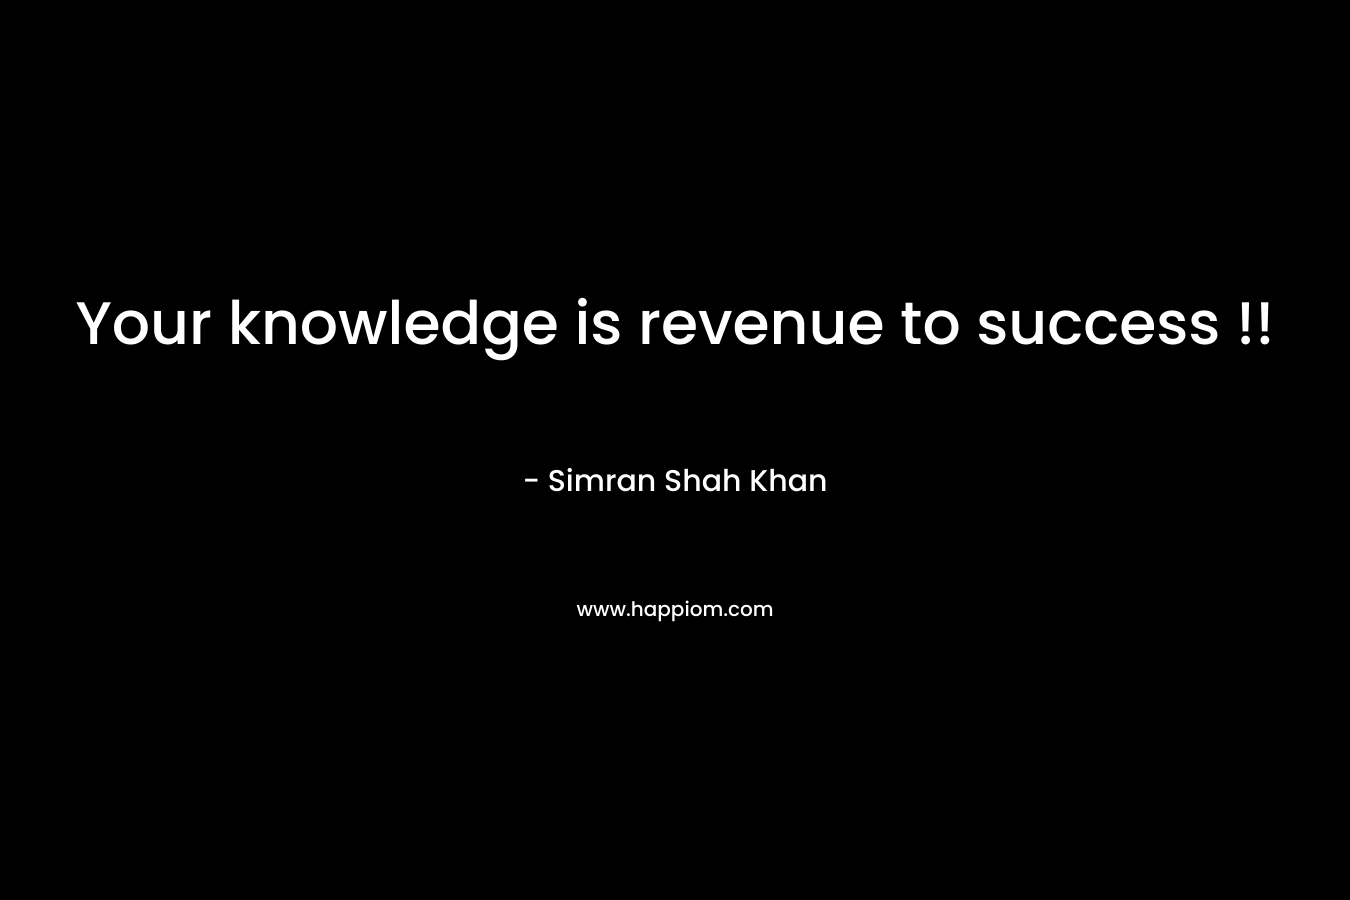 Your knowledge is revenue to success !!